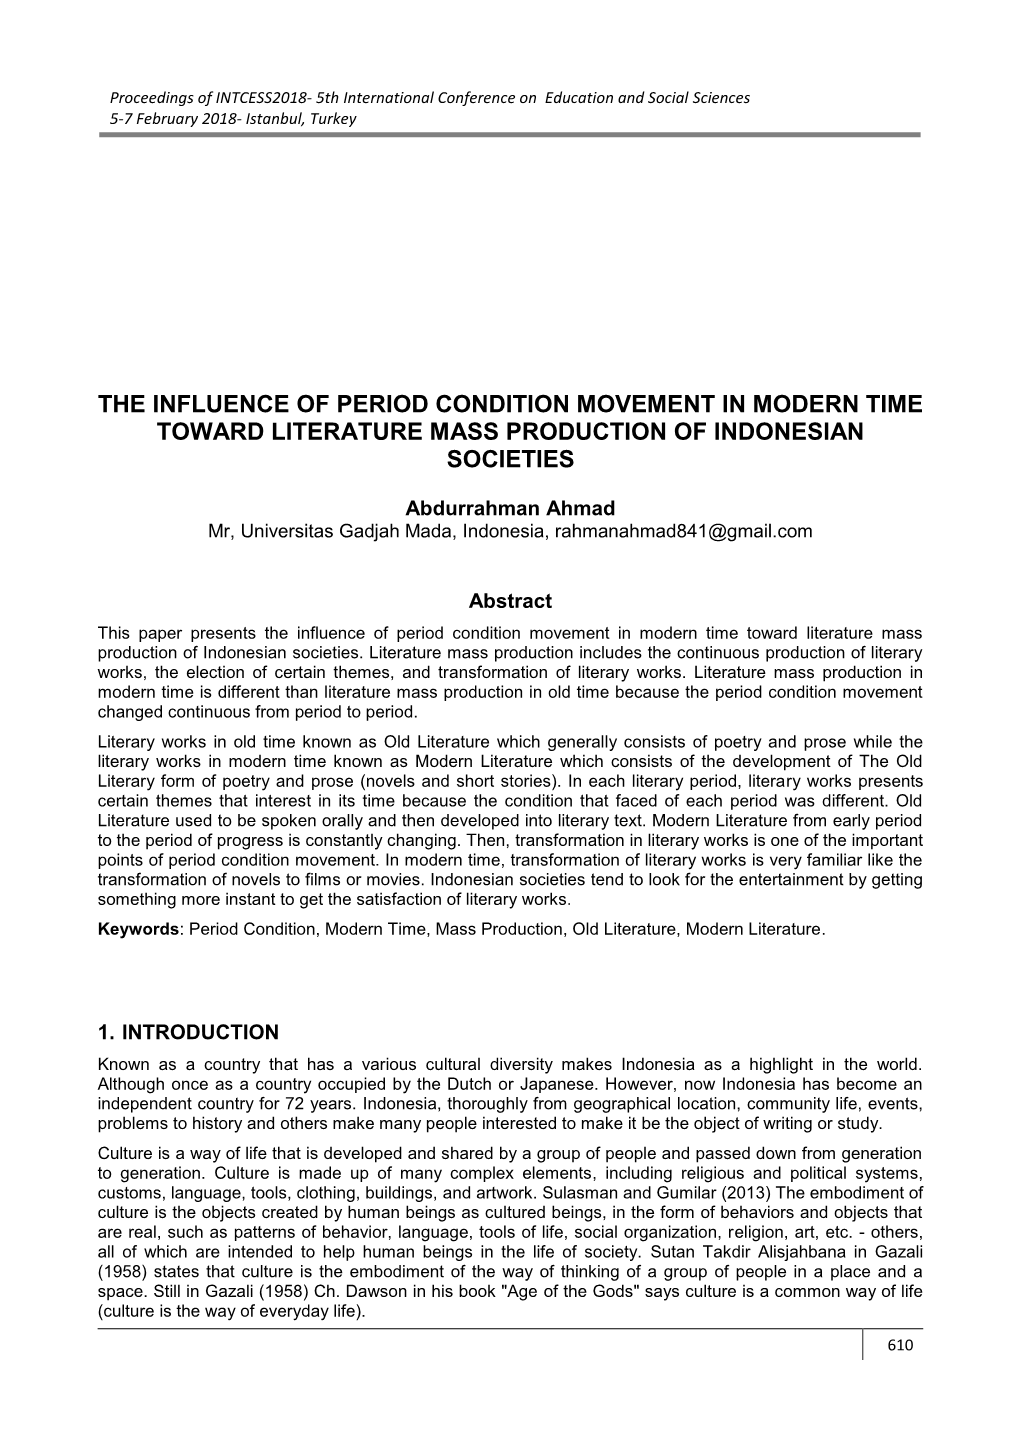 The Influence of Period Condition Movement in Modern Time Toward Literature Mass Production of Indonesian Societies